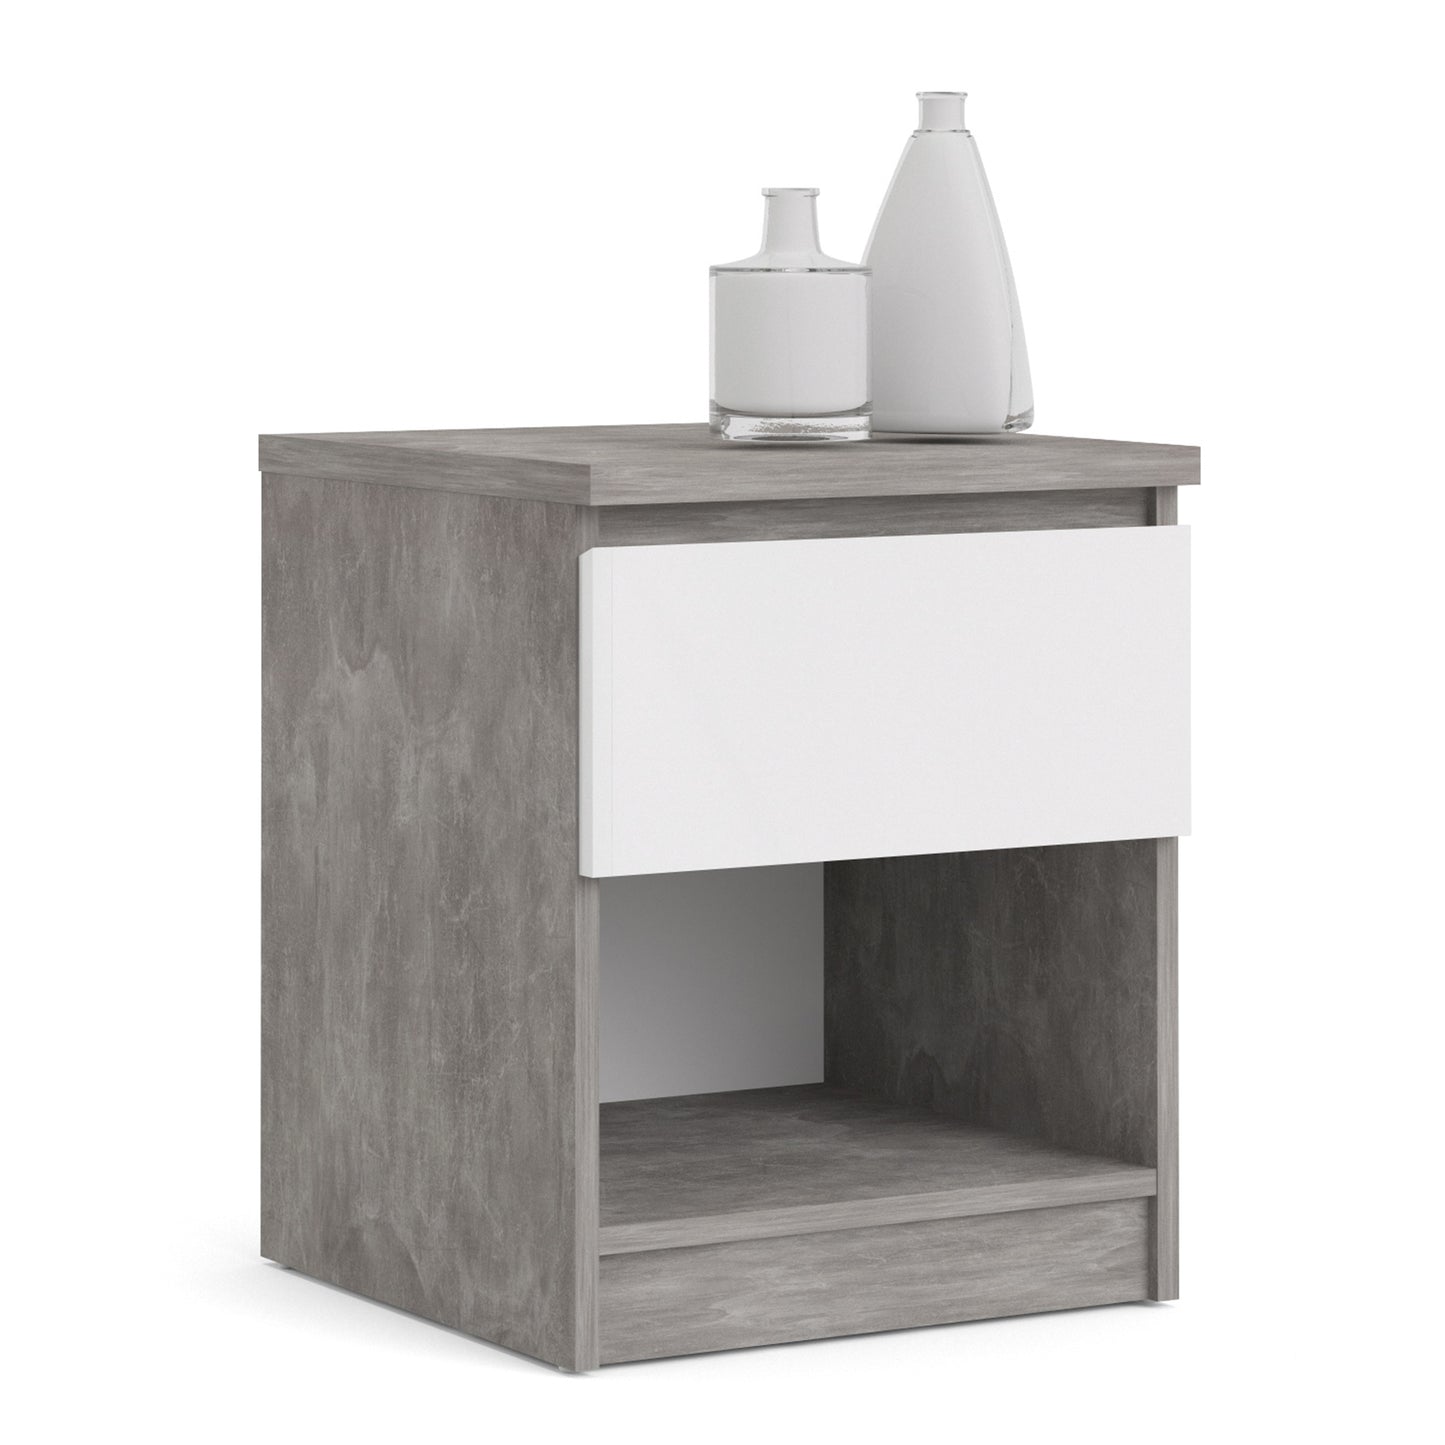 Naia  Bedside 1 Drawer 1 Shelf in Concrete and White High Gloss